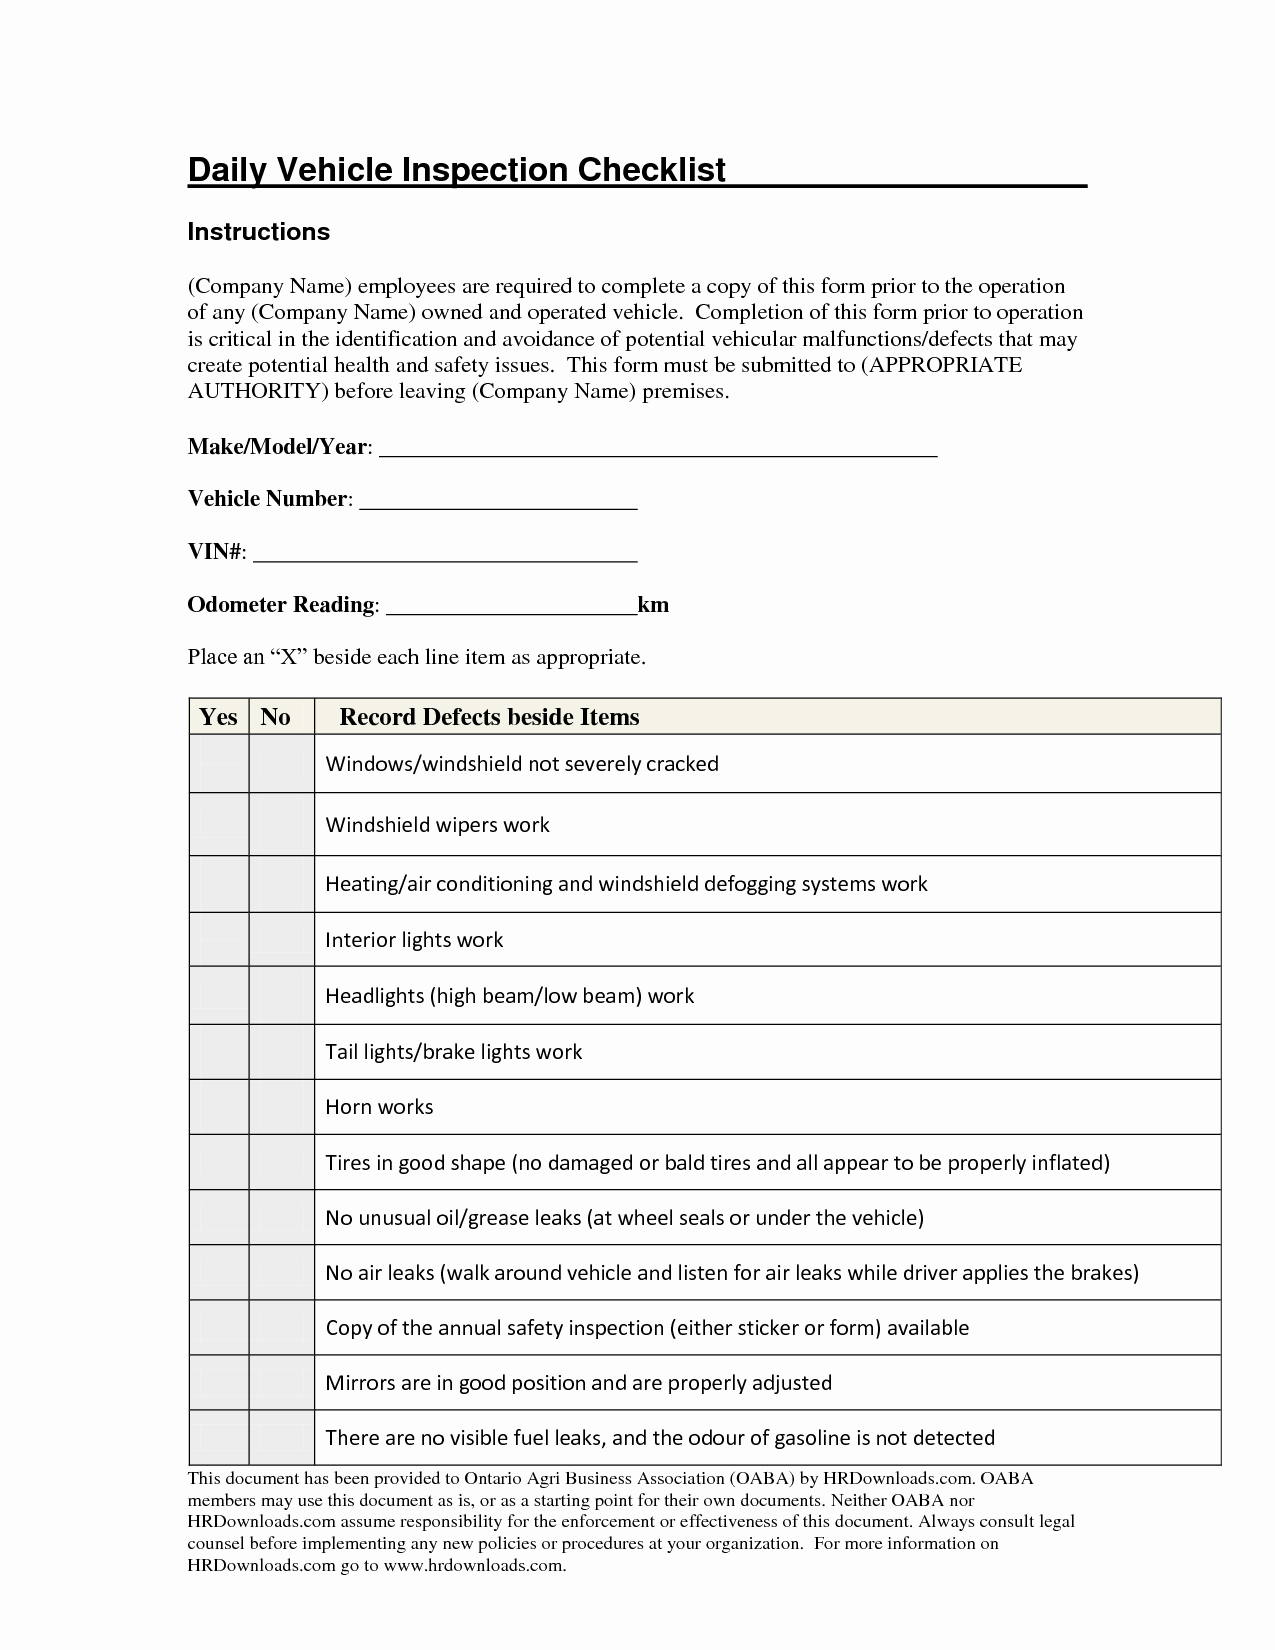 Daily Vehicle Inspection Report Template Unique Daily Vehicle Inspection Checklist form Image Gallery Gyps Fice forms